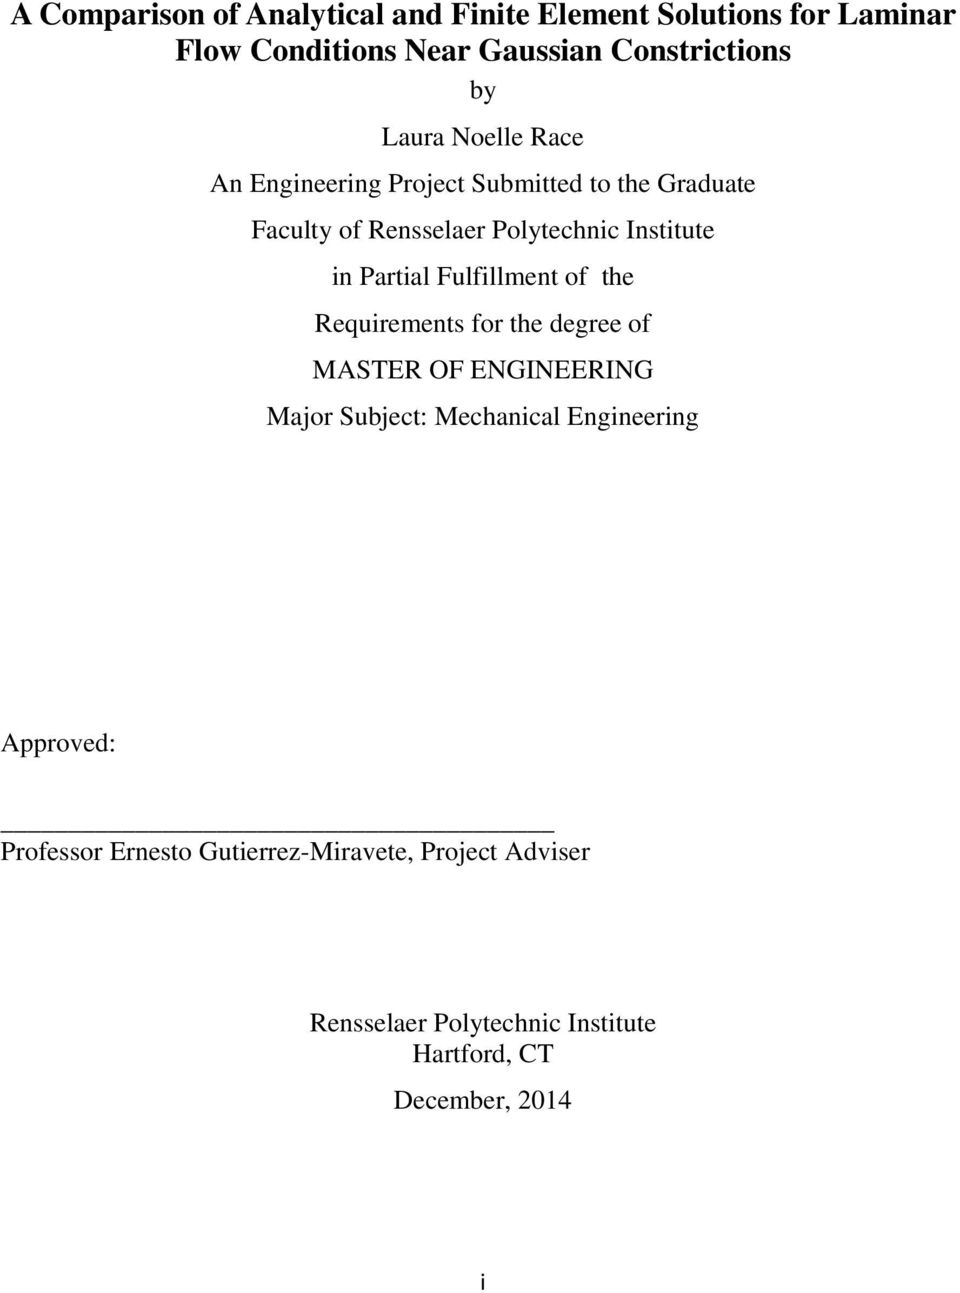 Partial Fulfillment of the Requirements for the degree of MASTER OF ENGINEERING Major Subject: Mechanical Engineering